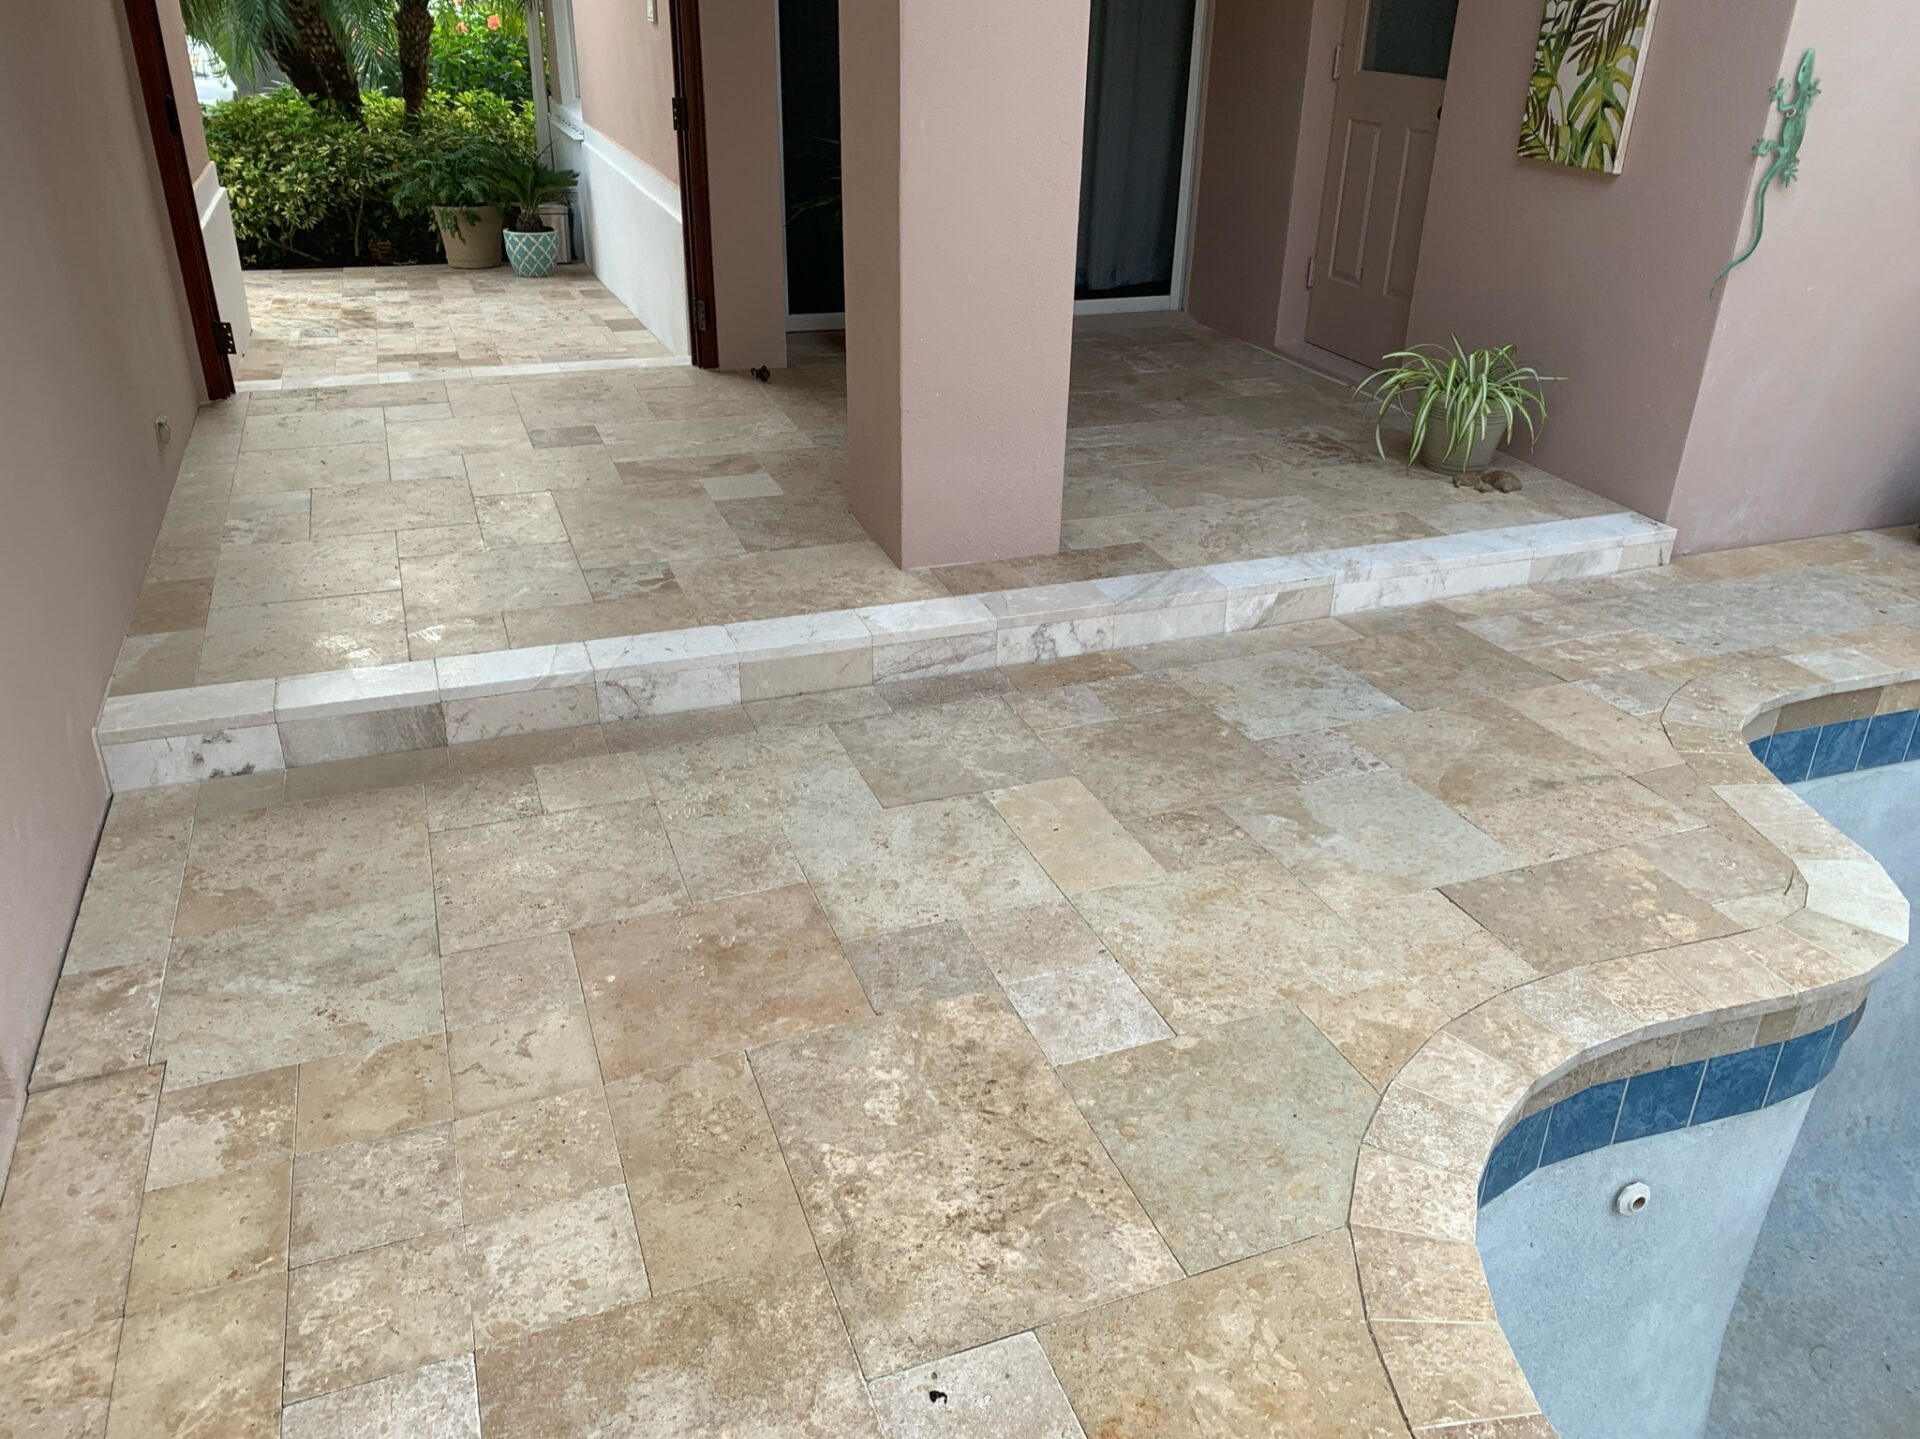 Outdoor patio area with beige and tan stone tile flooring near a pool. Features steps, a door, potted plants, and a decorative lizard on the wall.